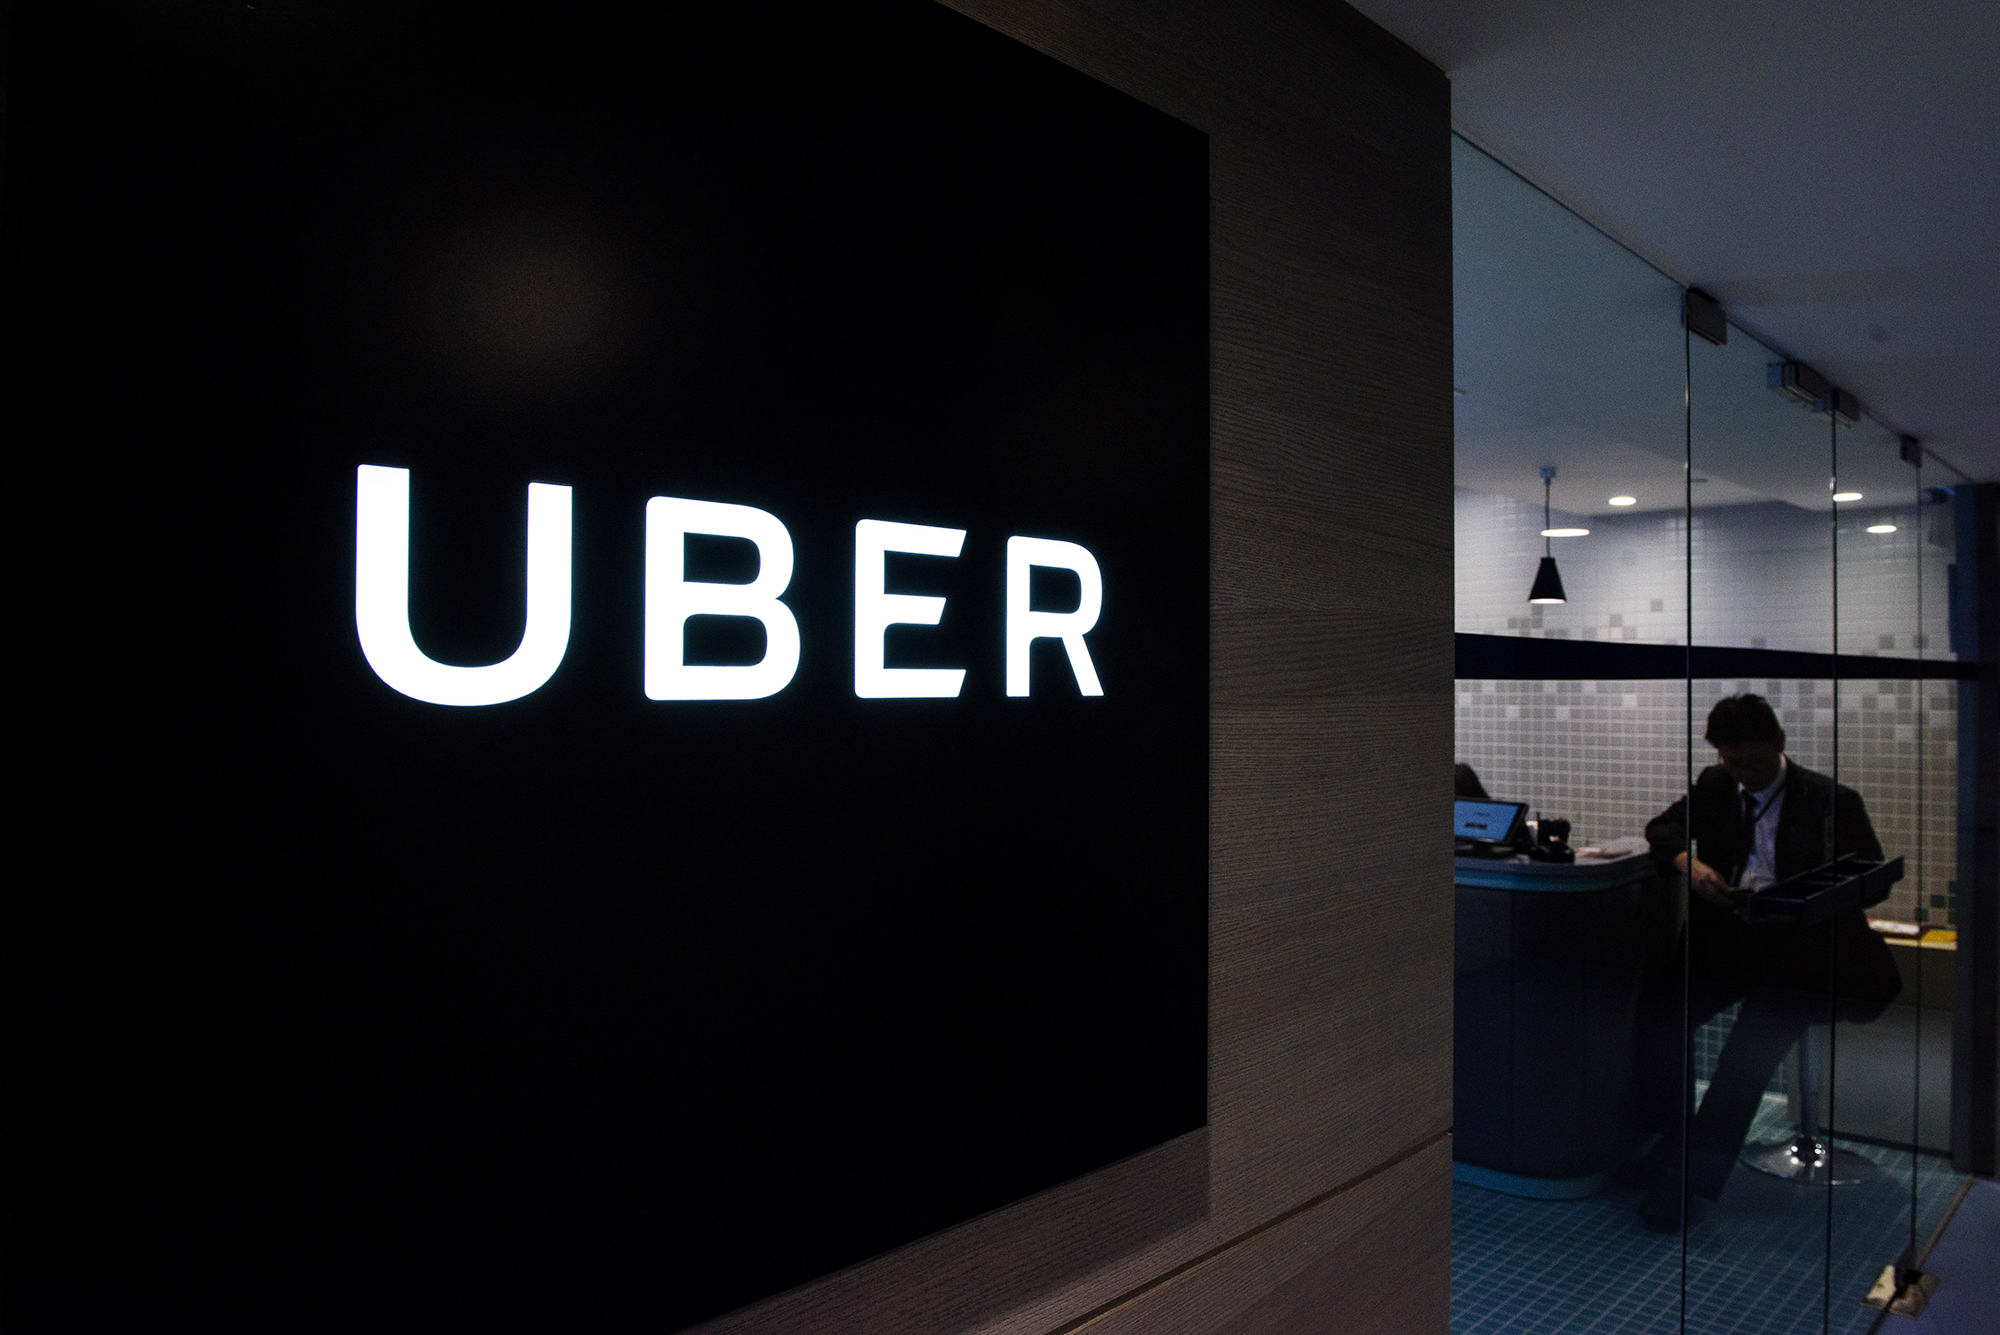 Uber's offices in Hong Kong, on March 10, 2017. (Anthony Wallace—AFP/Getty Images)